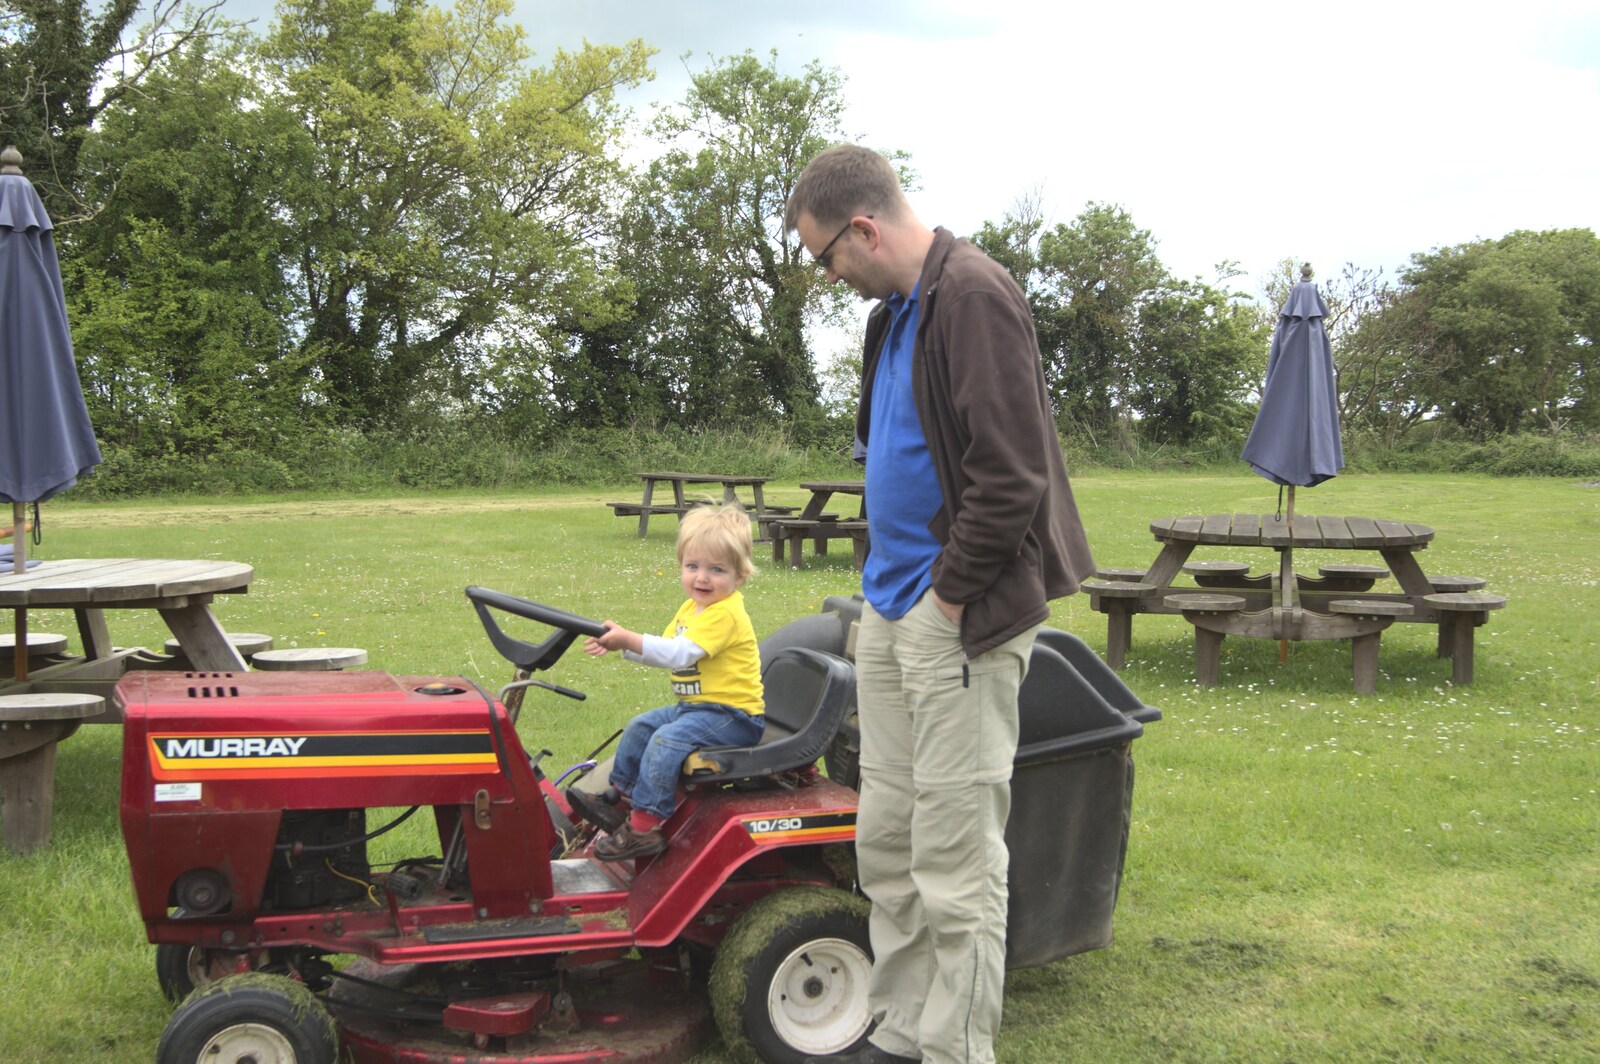 The BSCC Weekend Away, Buckden, St. Neots, Huntingdonshire - 15th May 2010: Fred sits on a ride-on lawnmower